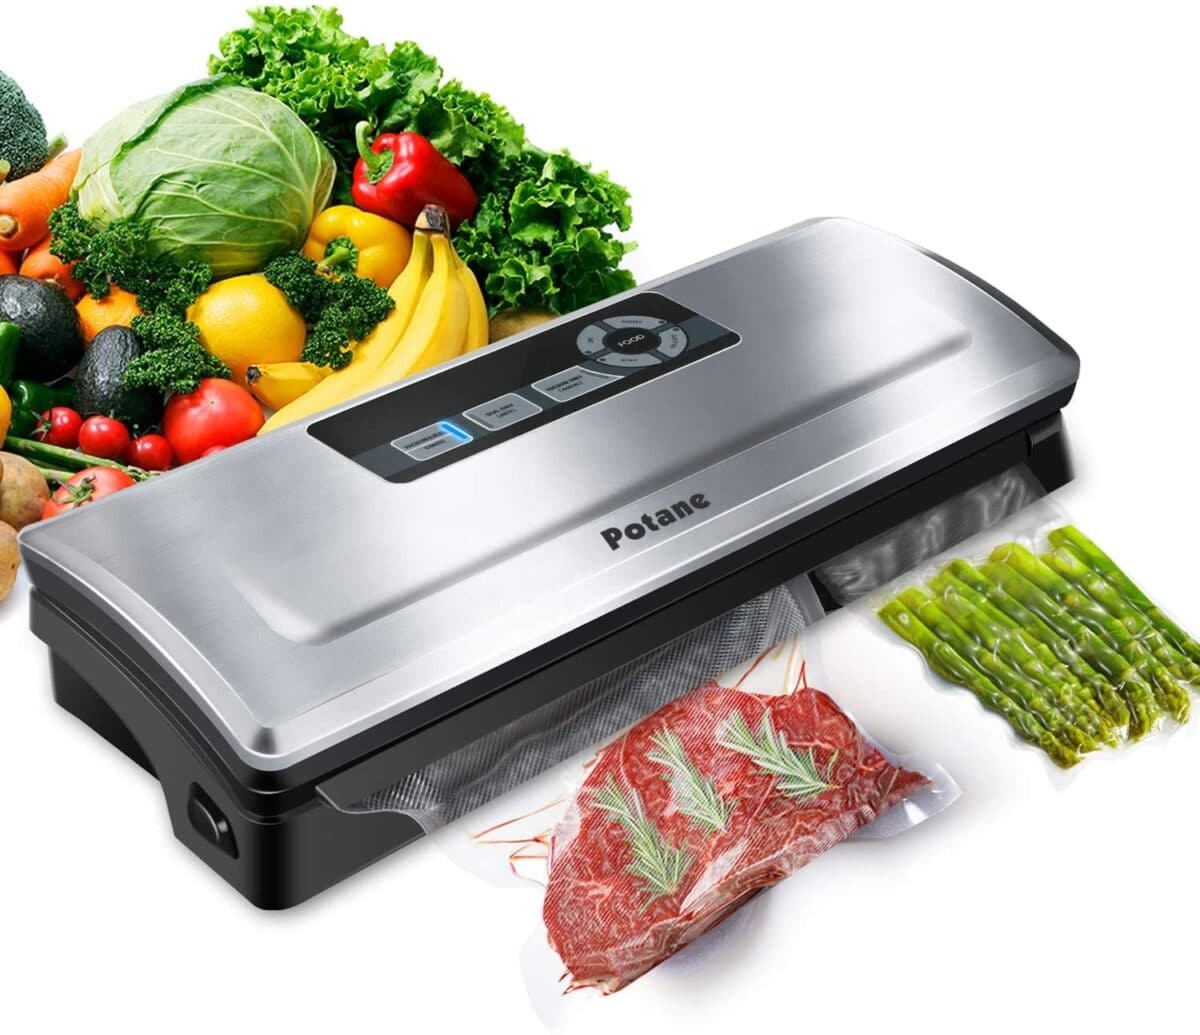 The 10 Best Vacuum Sealers for Food of 2021